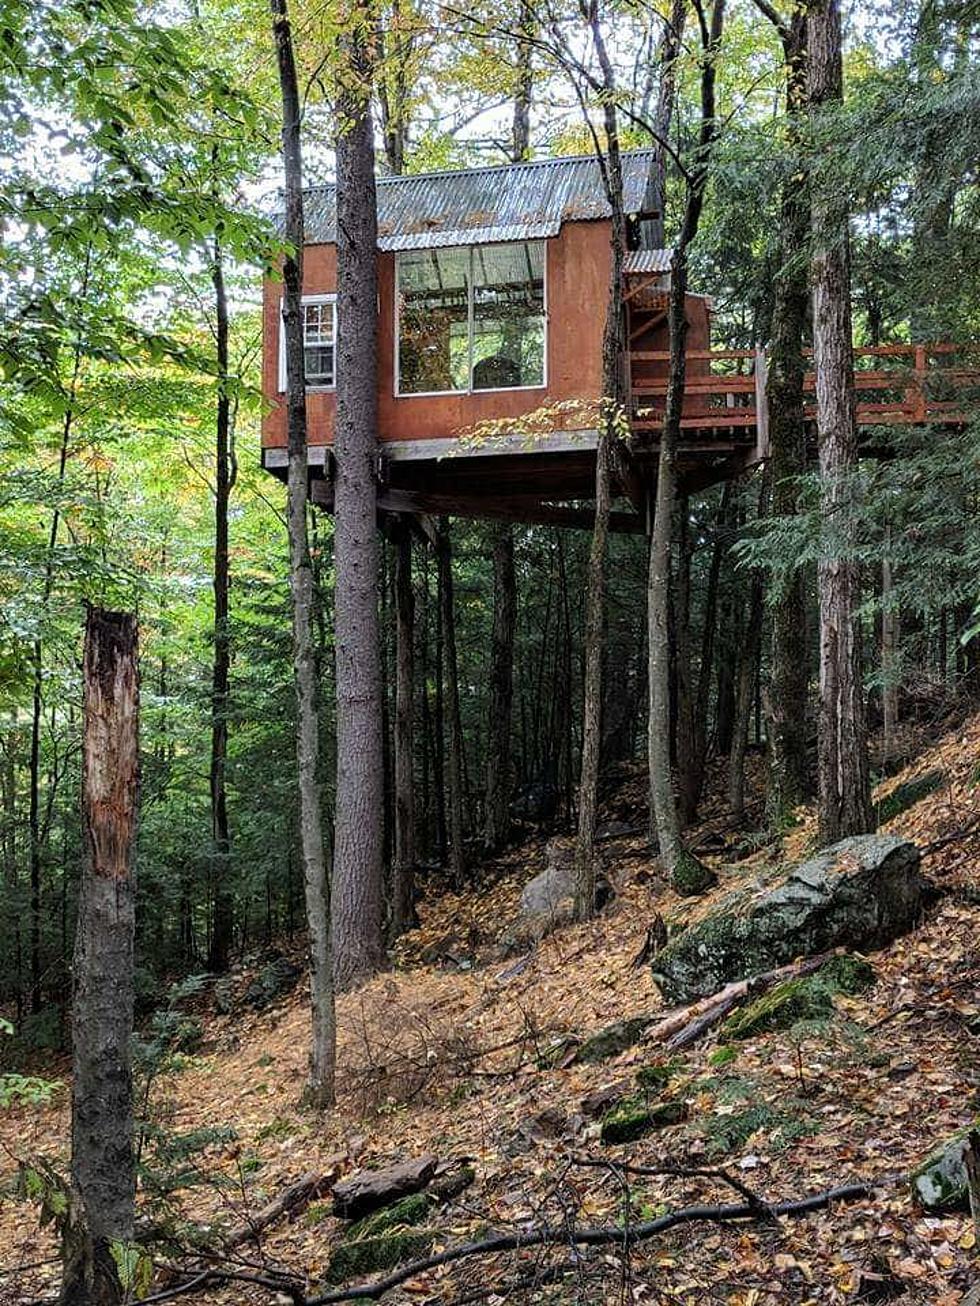 Want a Unique Getaway to See the Leaves Change? Try This Amazing Tree House Airbnb in New Hampshire